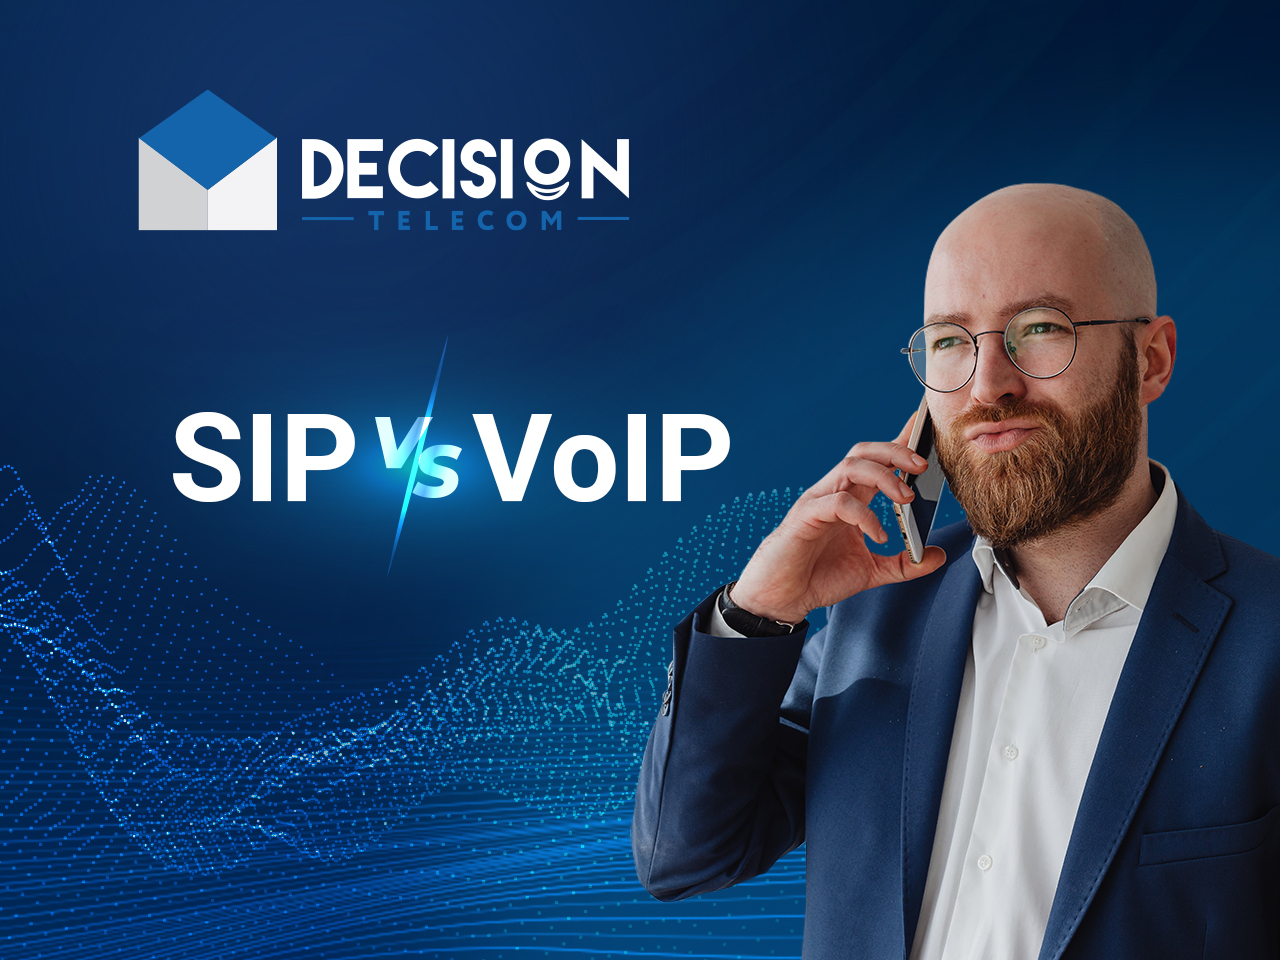 How VoIP telephony differs from SIP